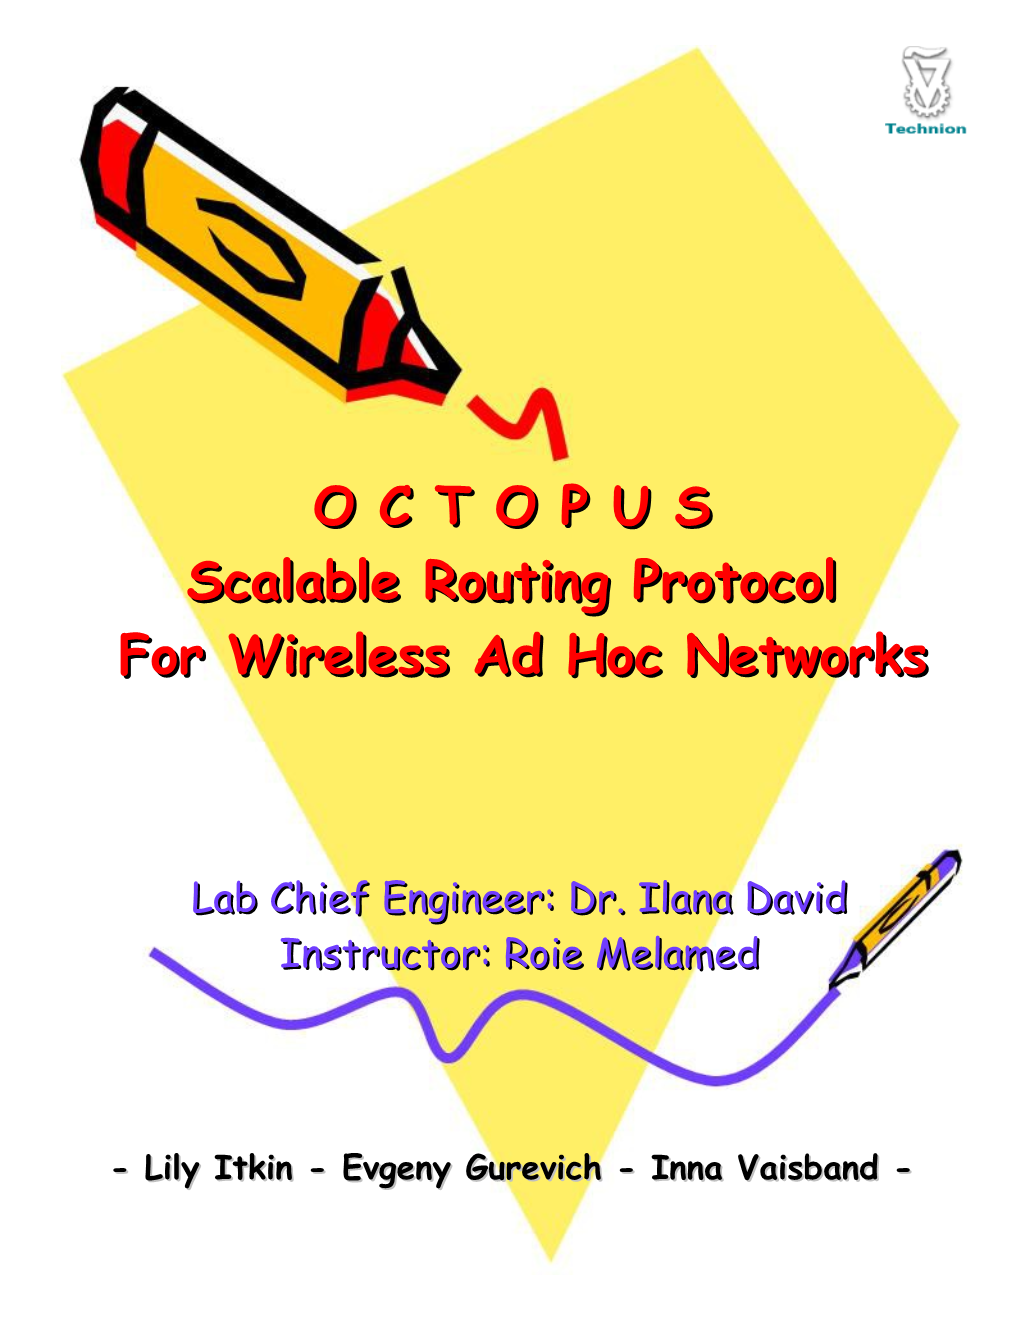 Octopus: a Fault-Tolerant and Efficient Ad-Hoc Routing Protocol